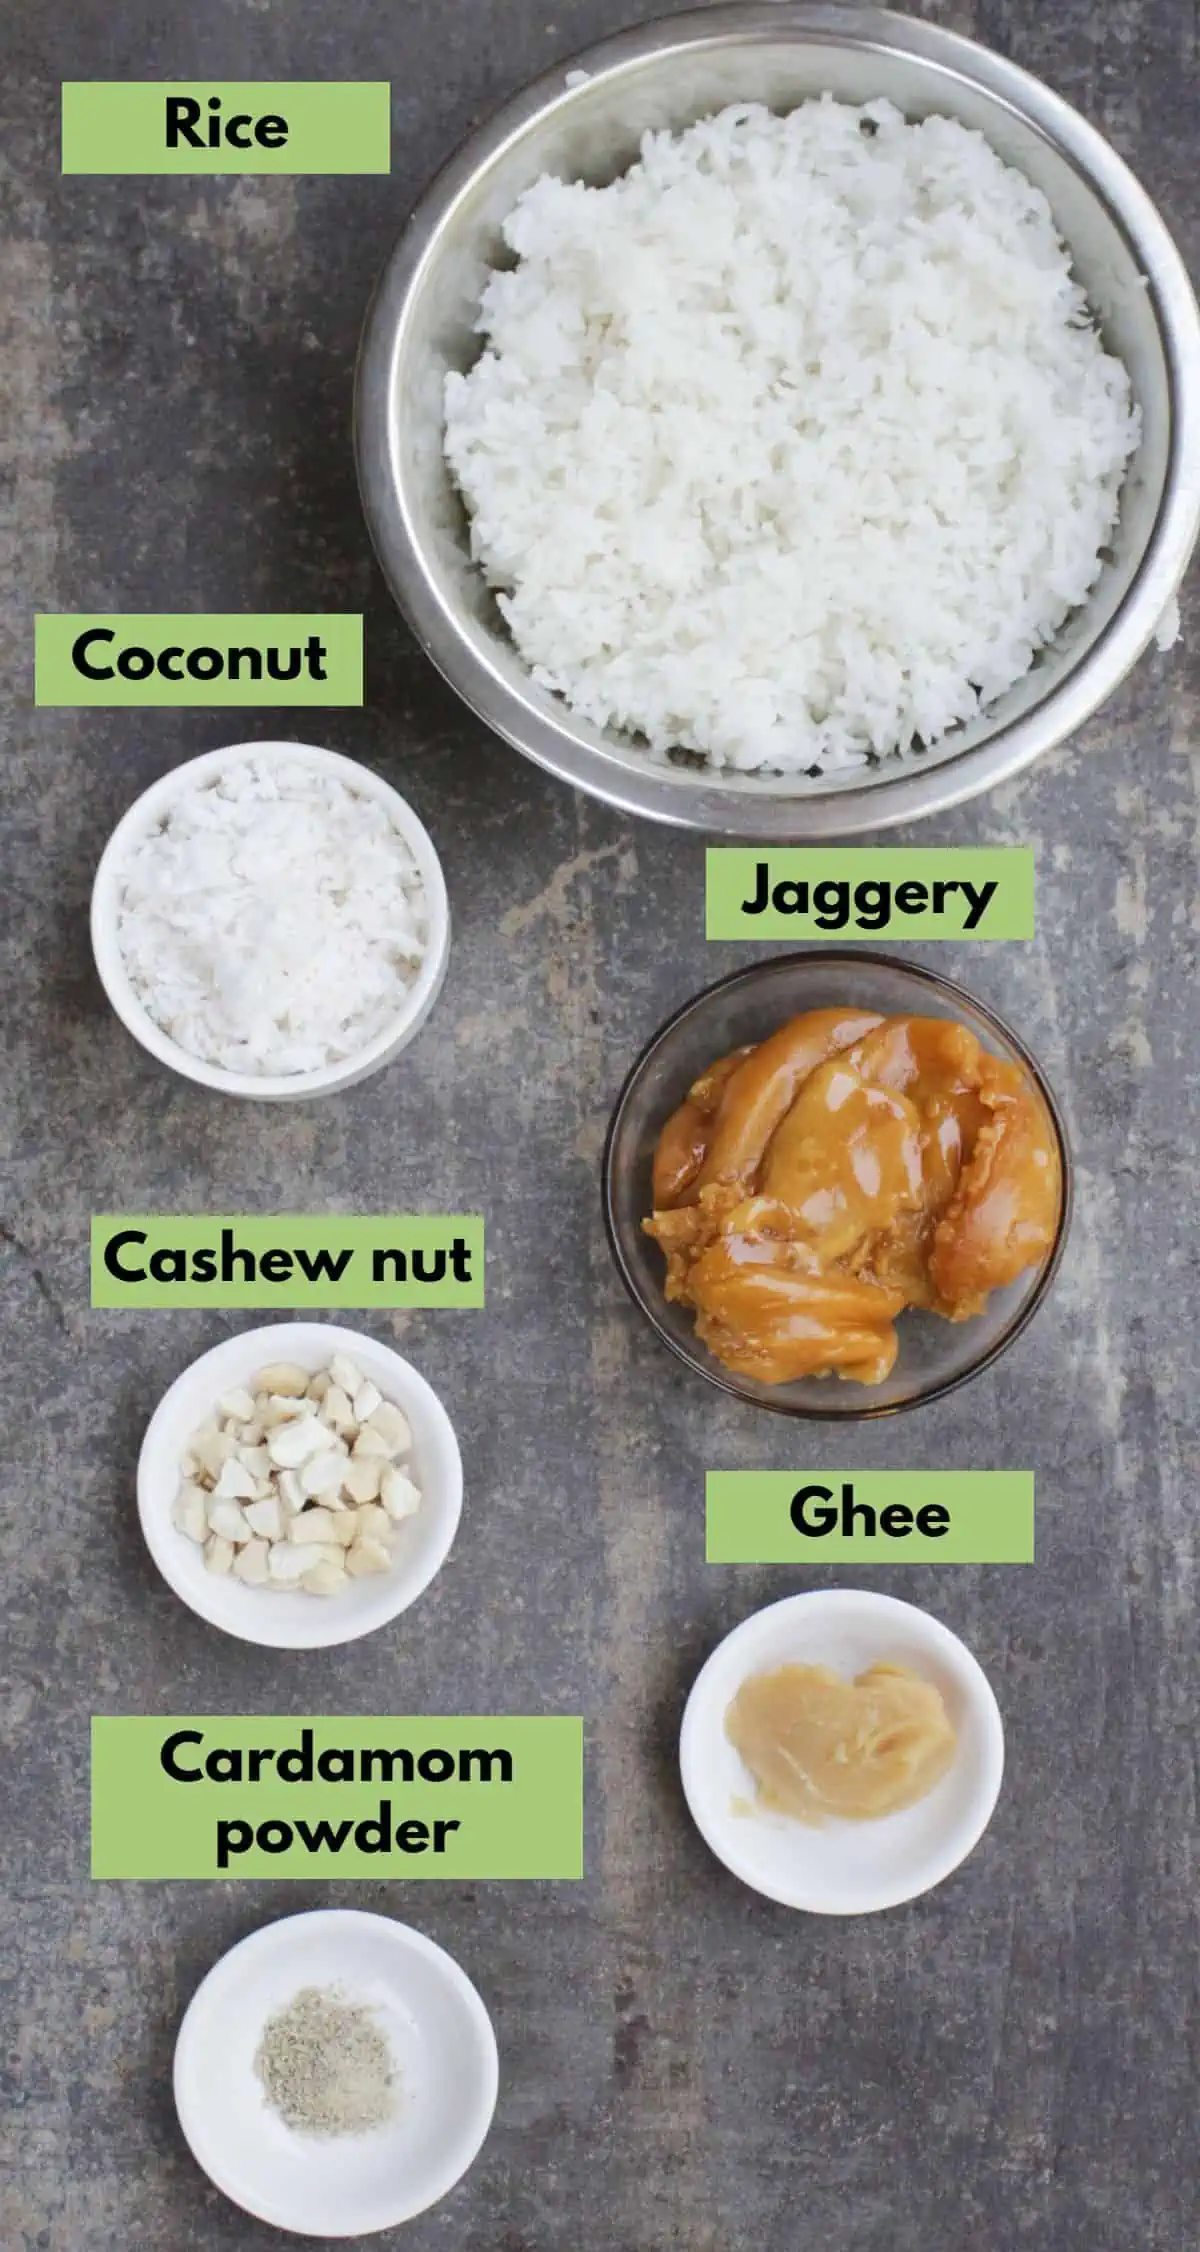 Ingredients needed to make sweet jaggery rice.